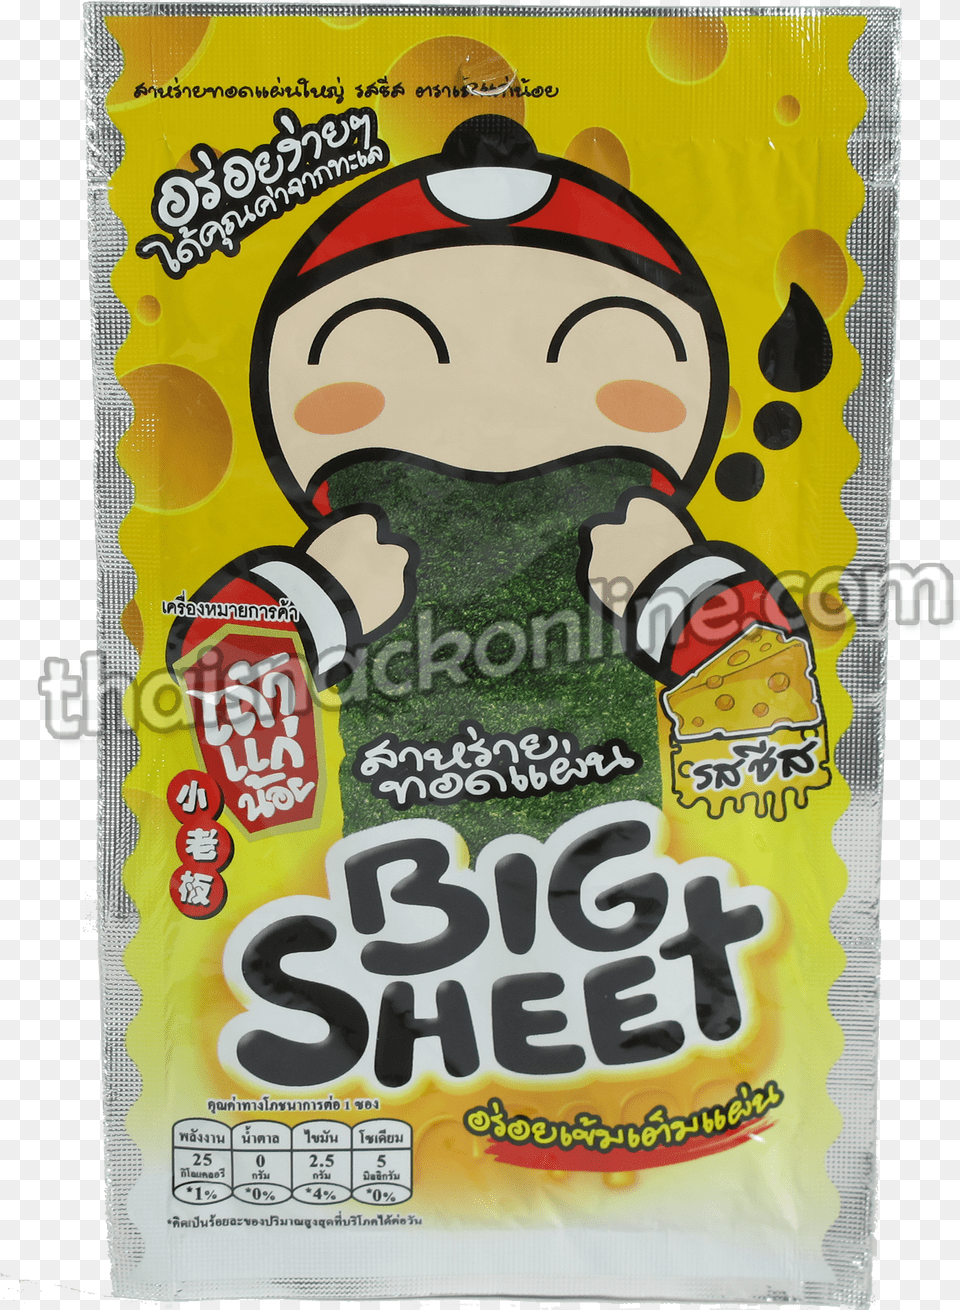 Cartoon, Advertisement, Food, Sweets, Poster Png